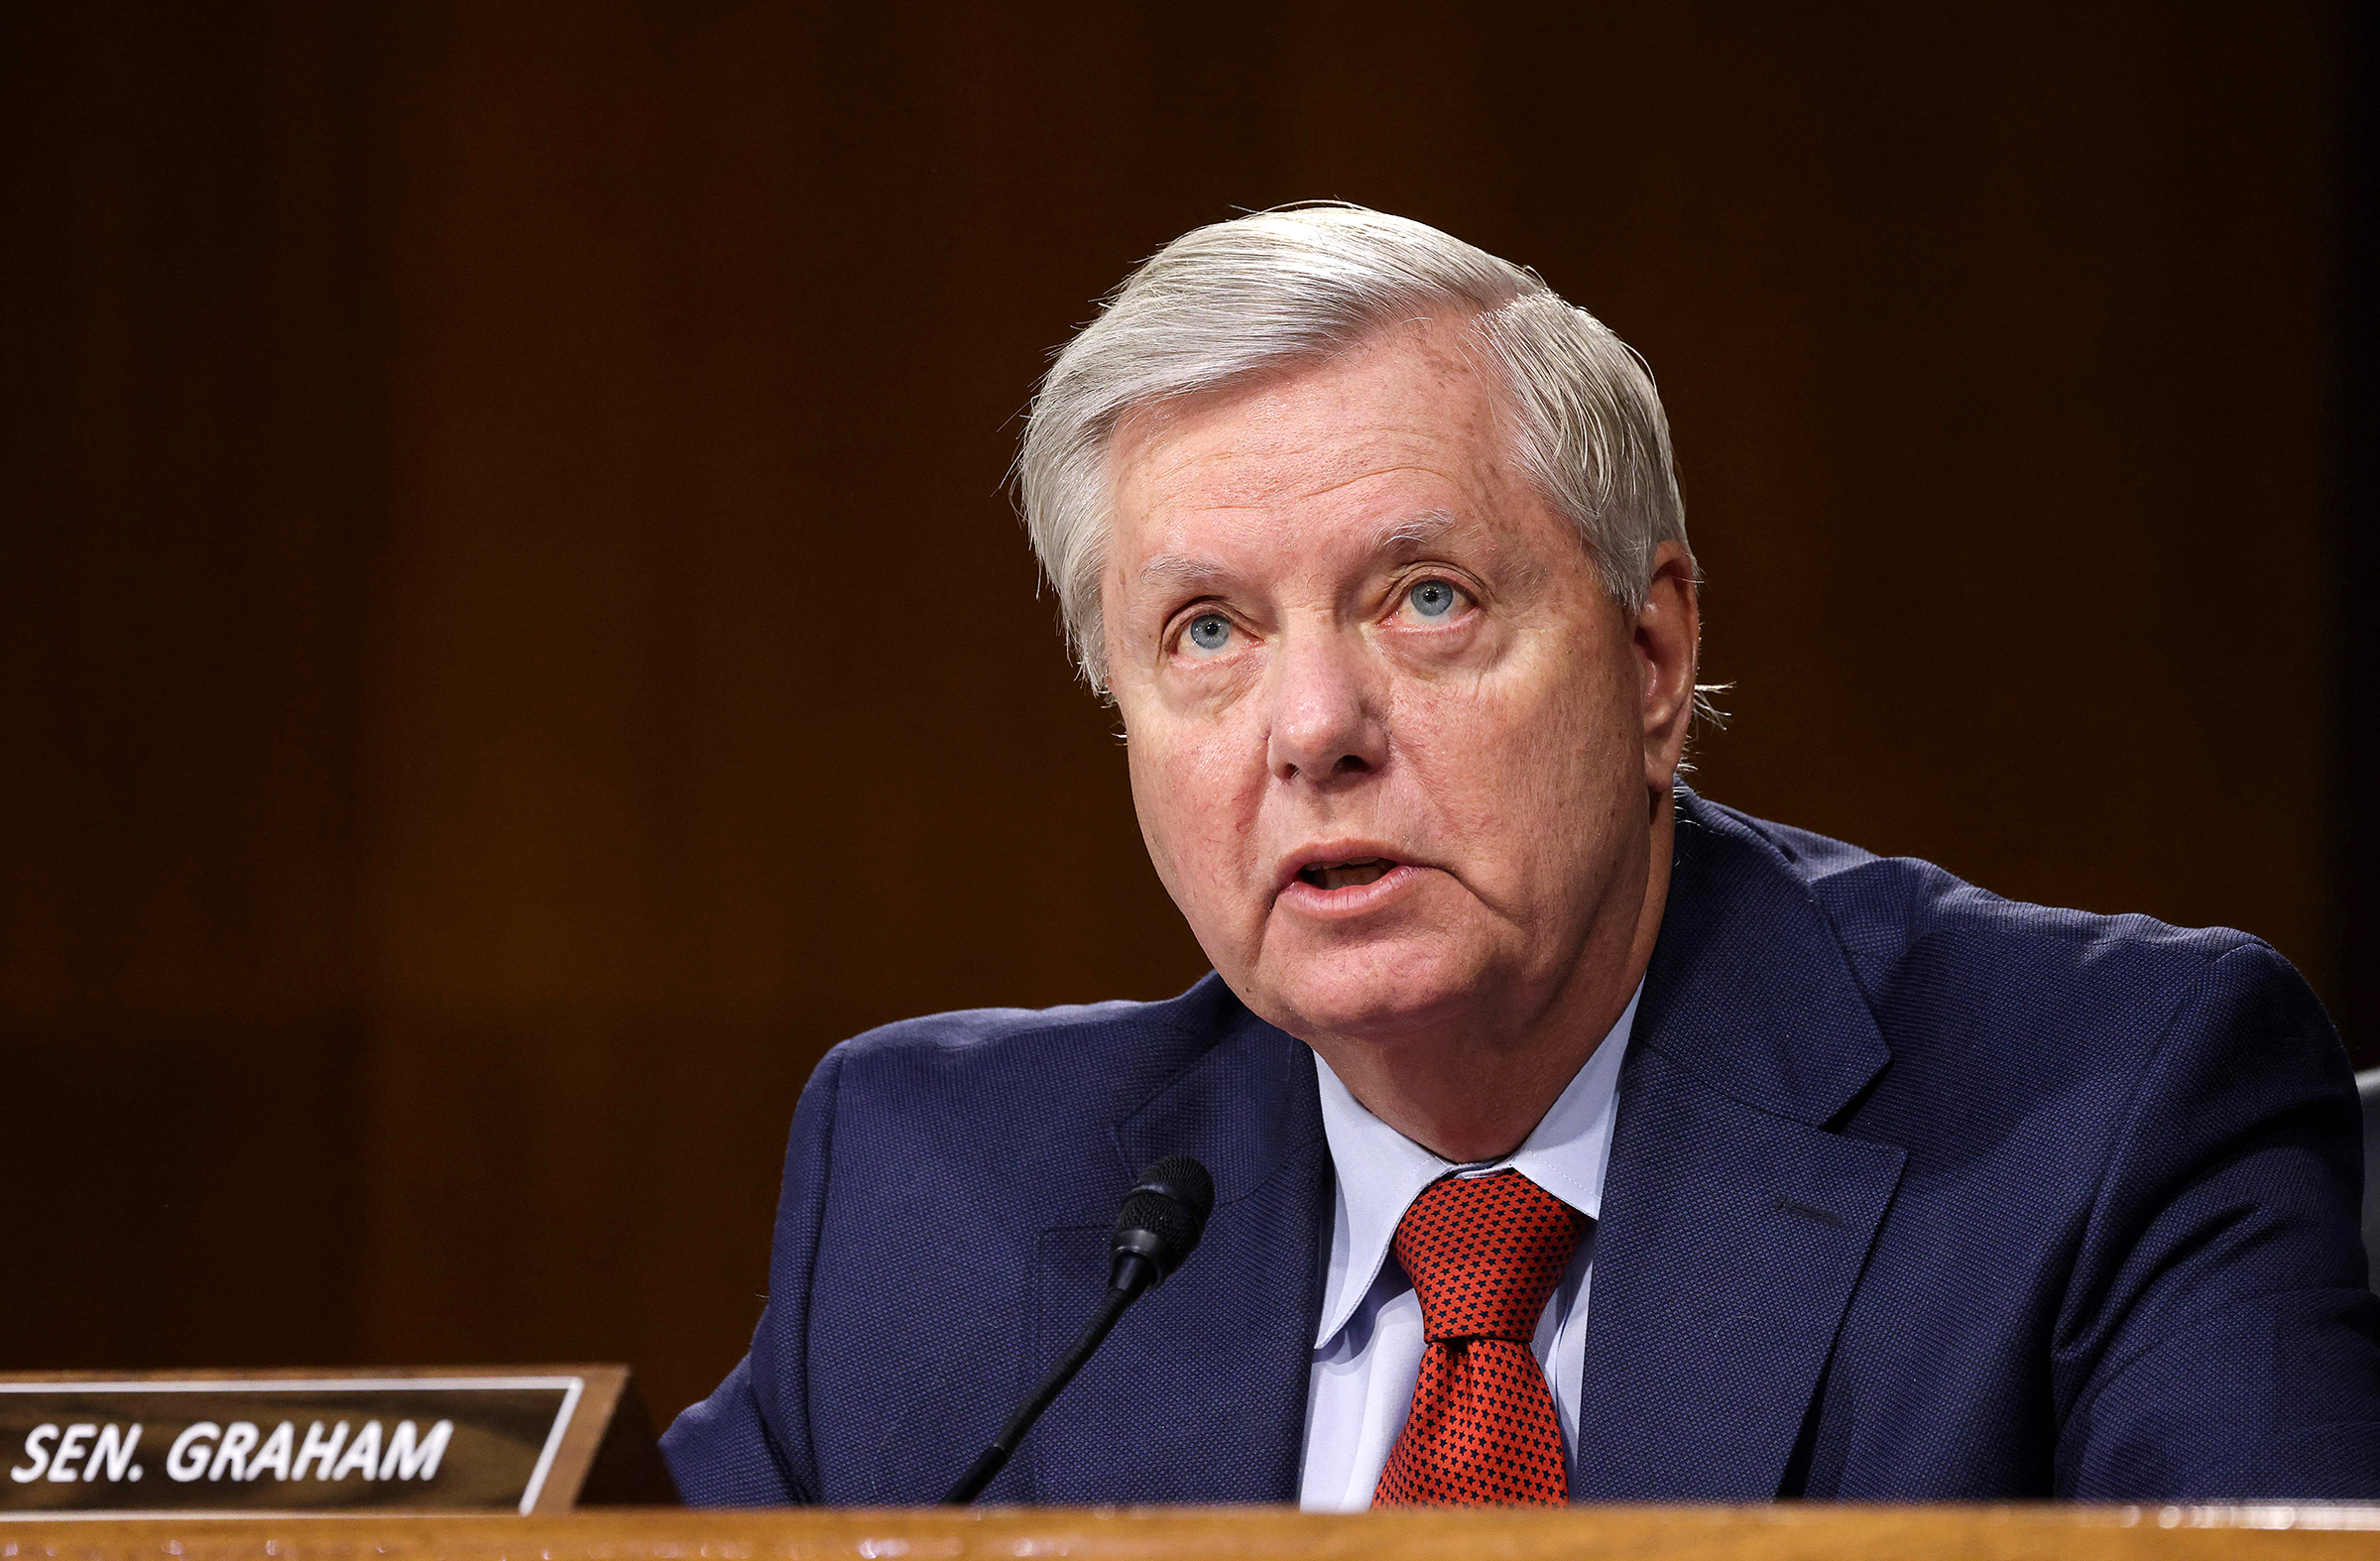 Sen. Lindsey Graham speaks during a Senate Committee on Appropriations hearing in Washington, DC, in 2021.